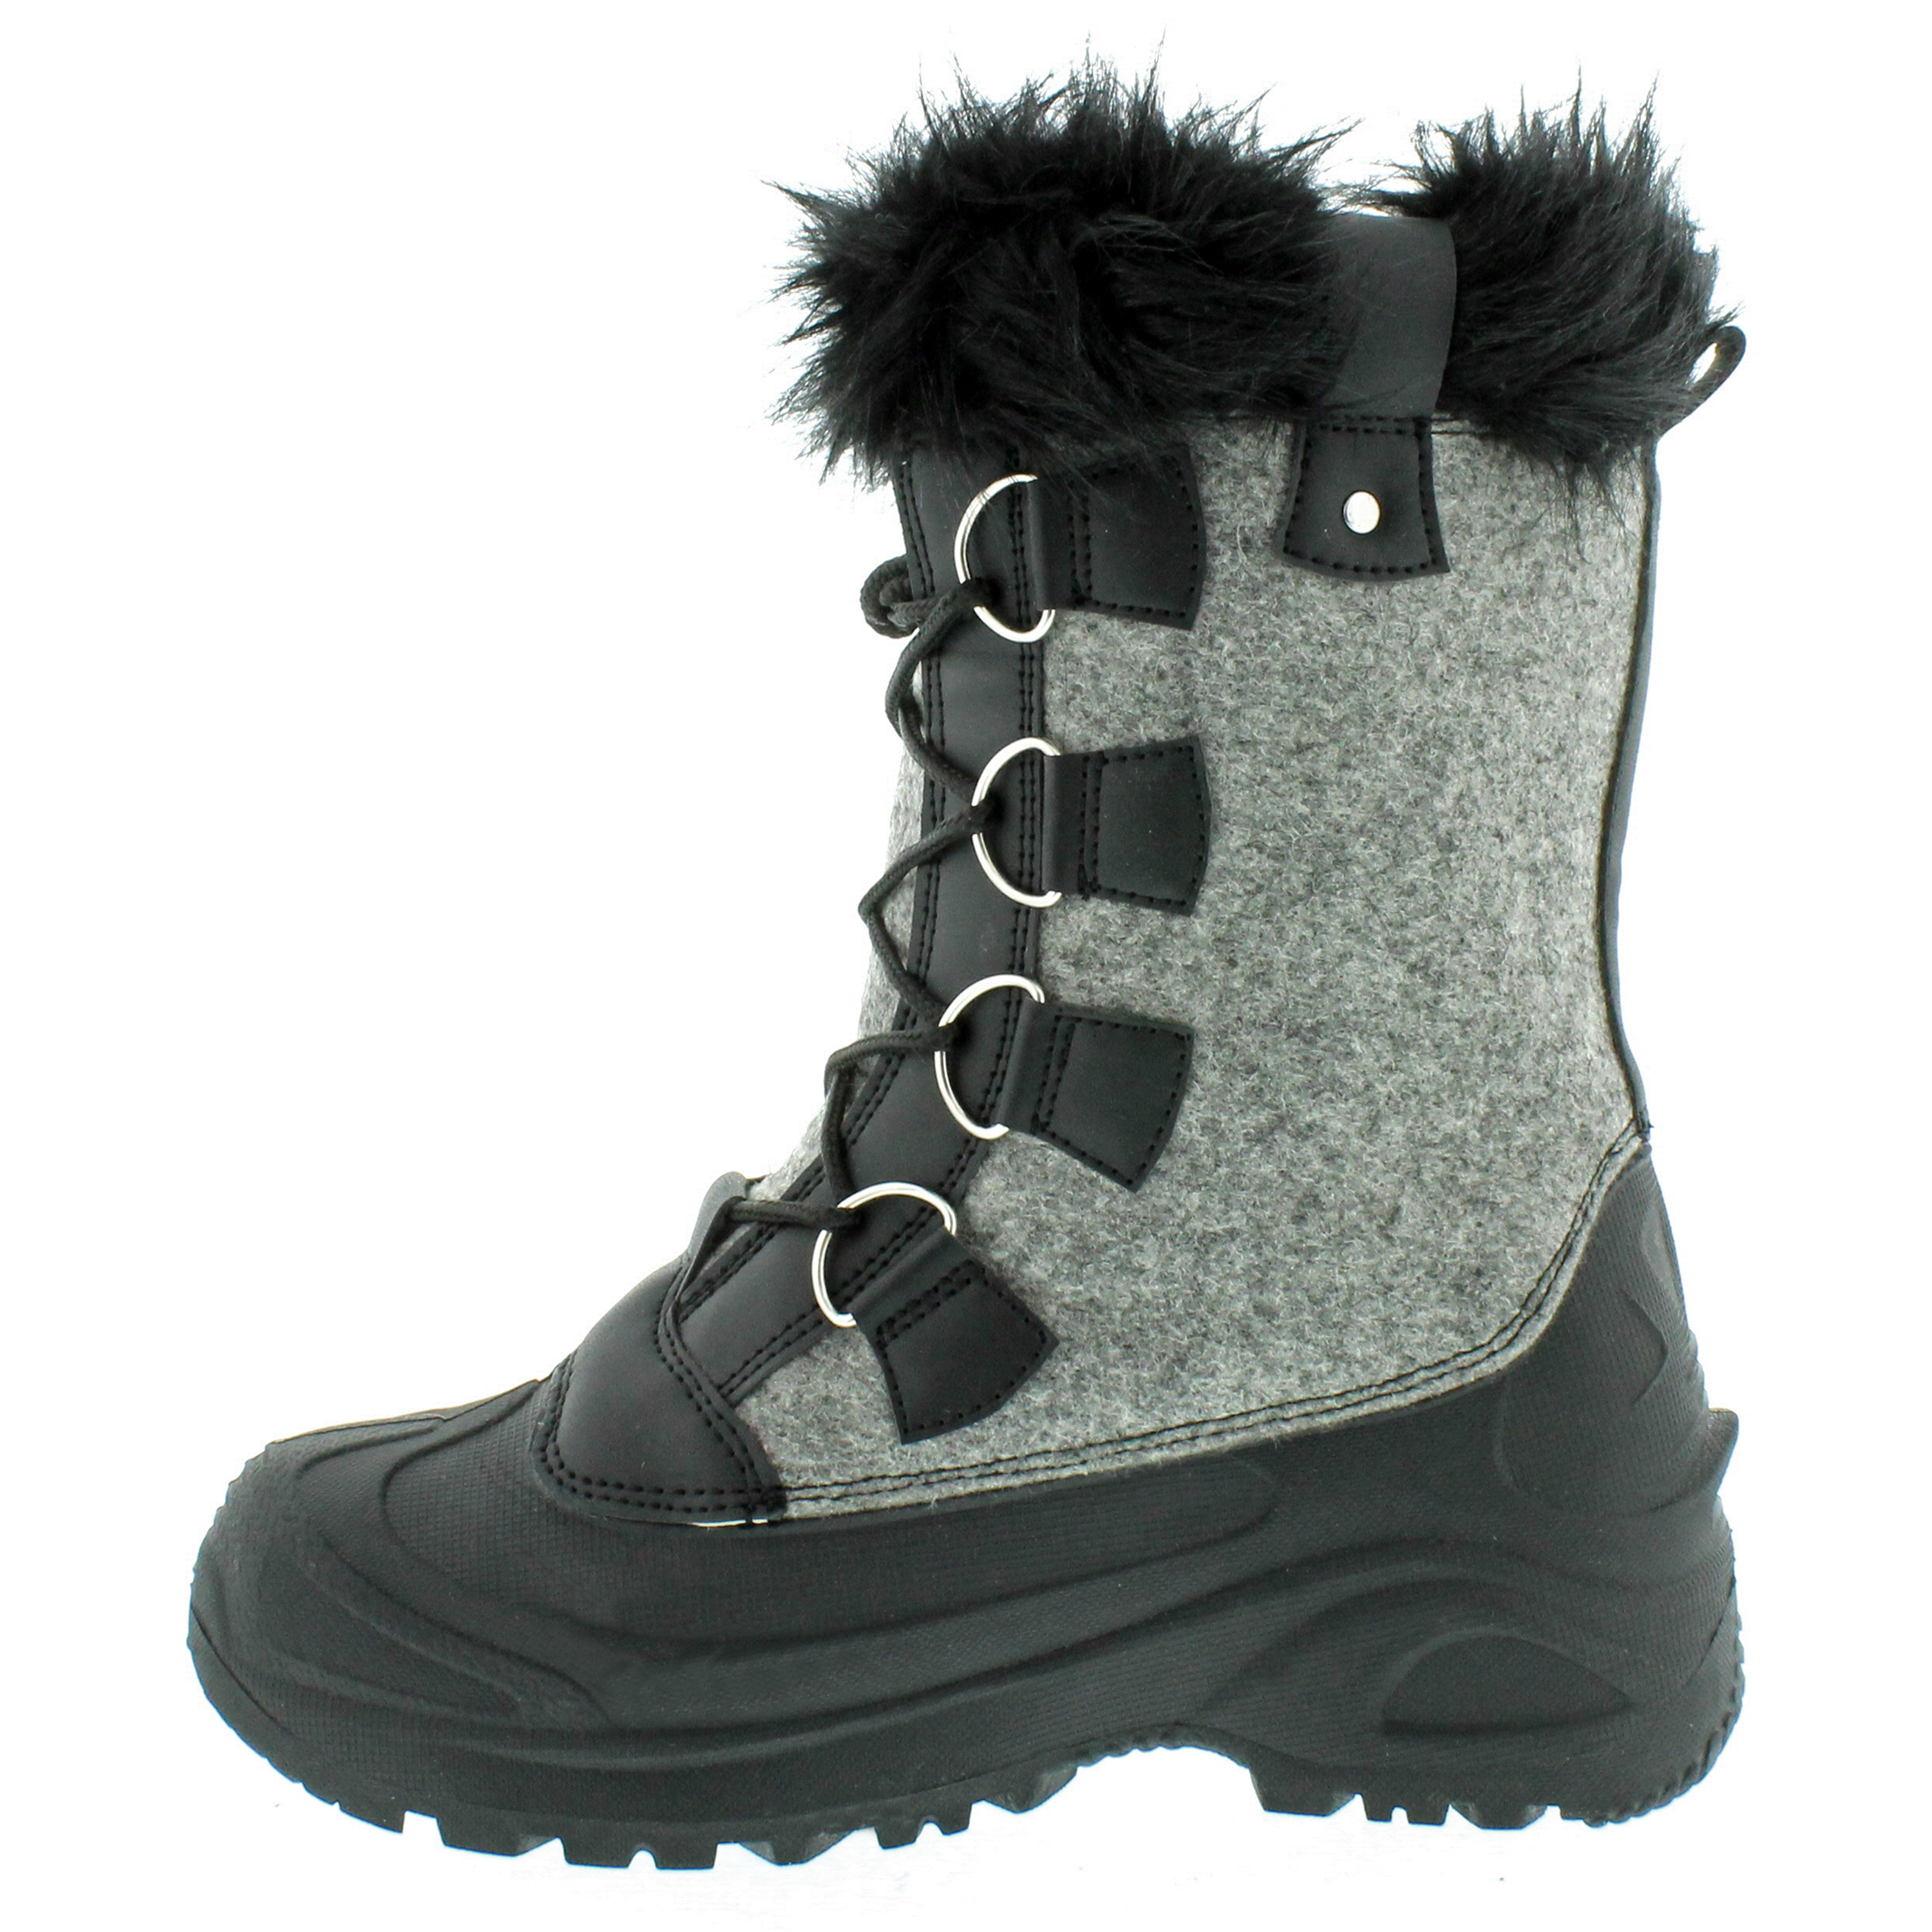 Cold Front Women's Snow Lodge Winter Boot - image 3 of 4